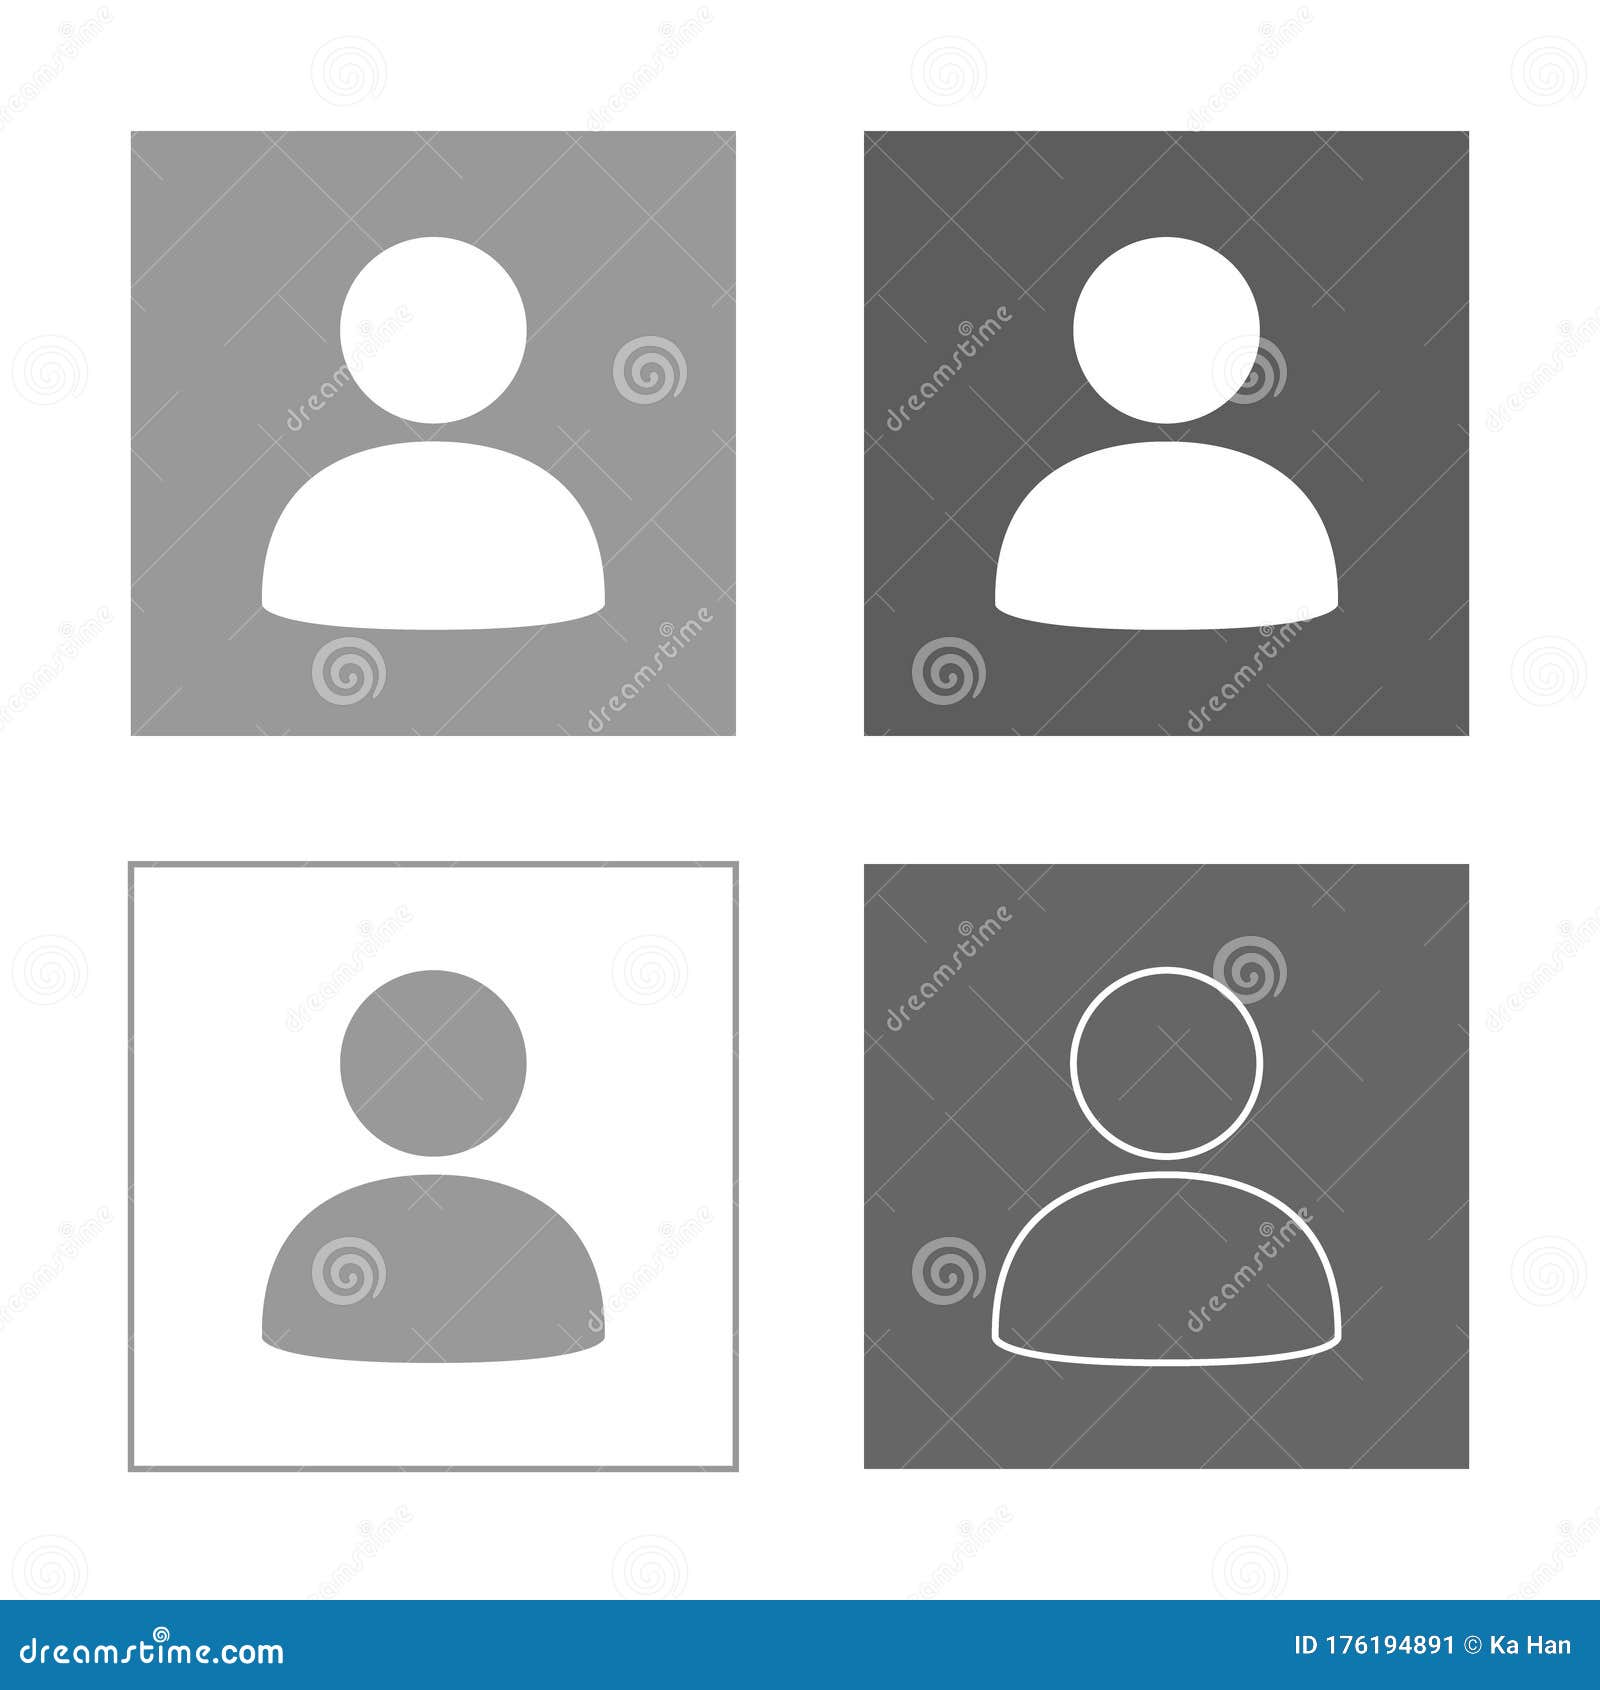 Default Avatar Icon Vector & Photo (Free Trial)